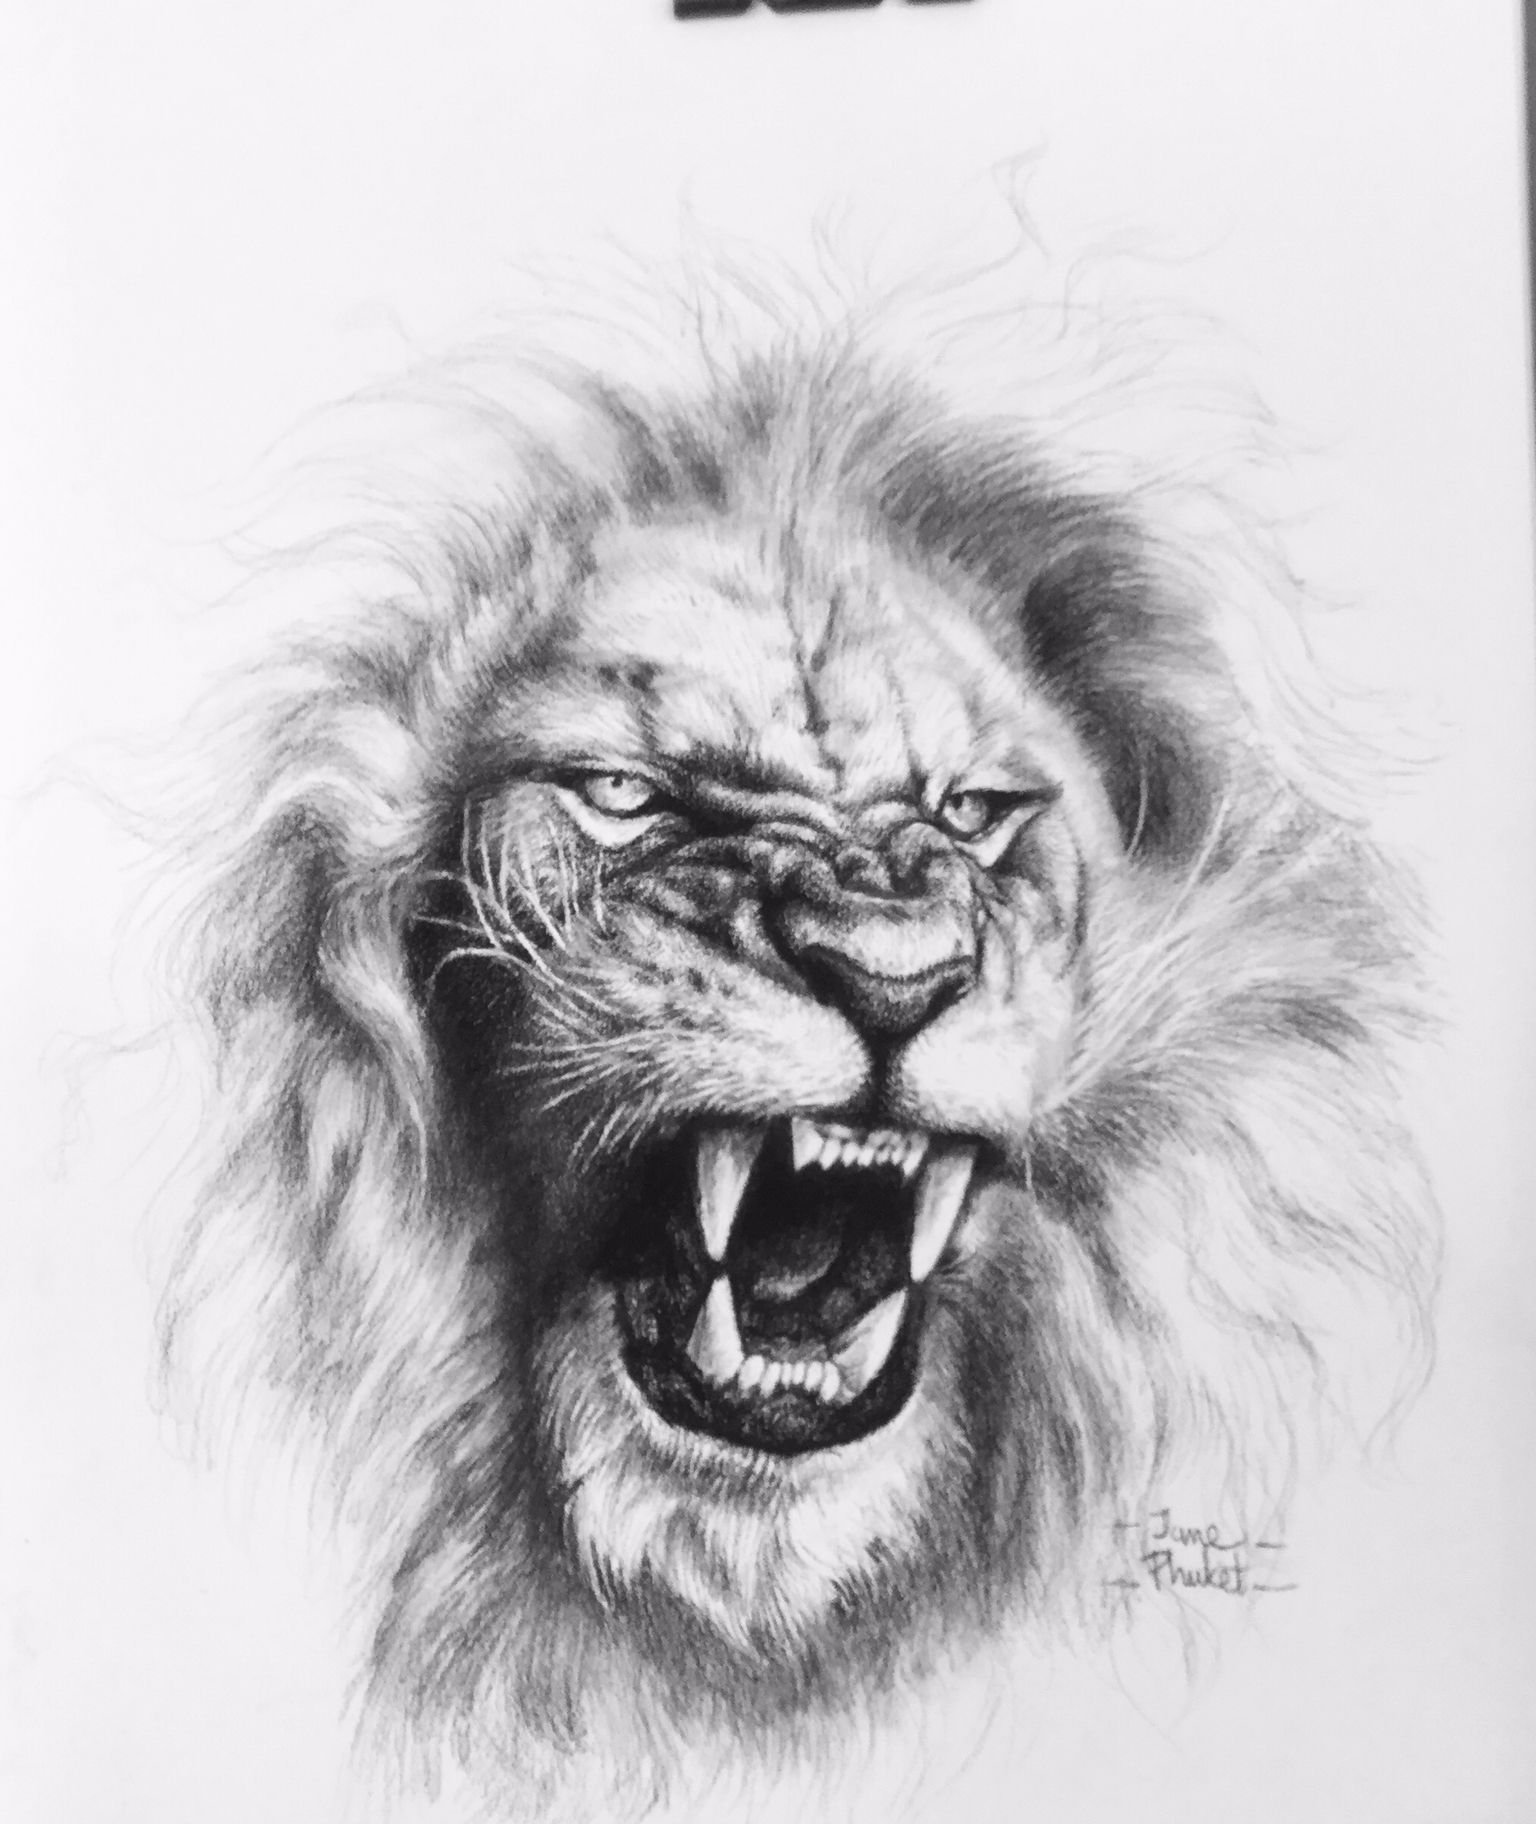 Buy Lion Charcoal Drawing Roaring Lion Empowerment Artwork Online in India   Etsy